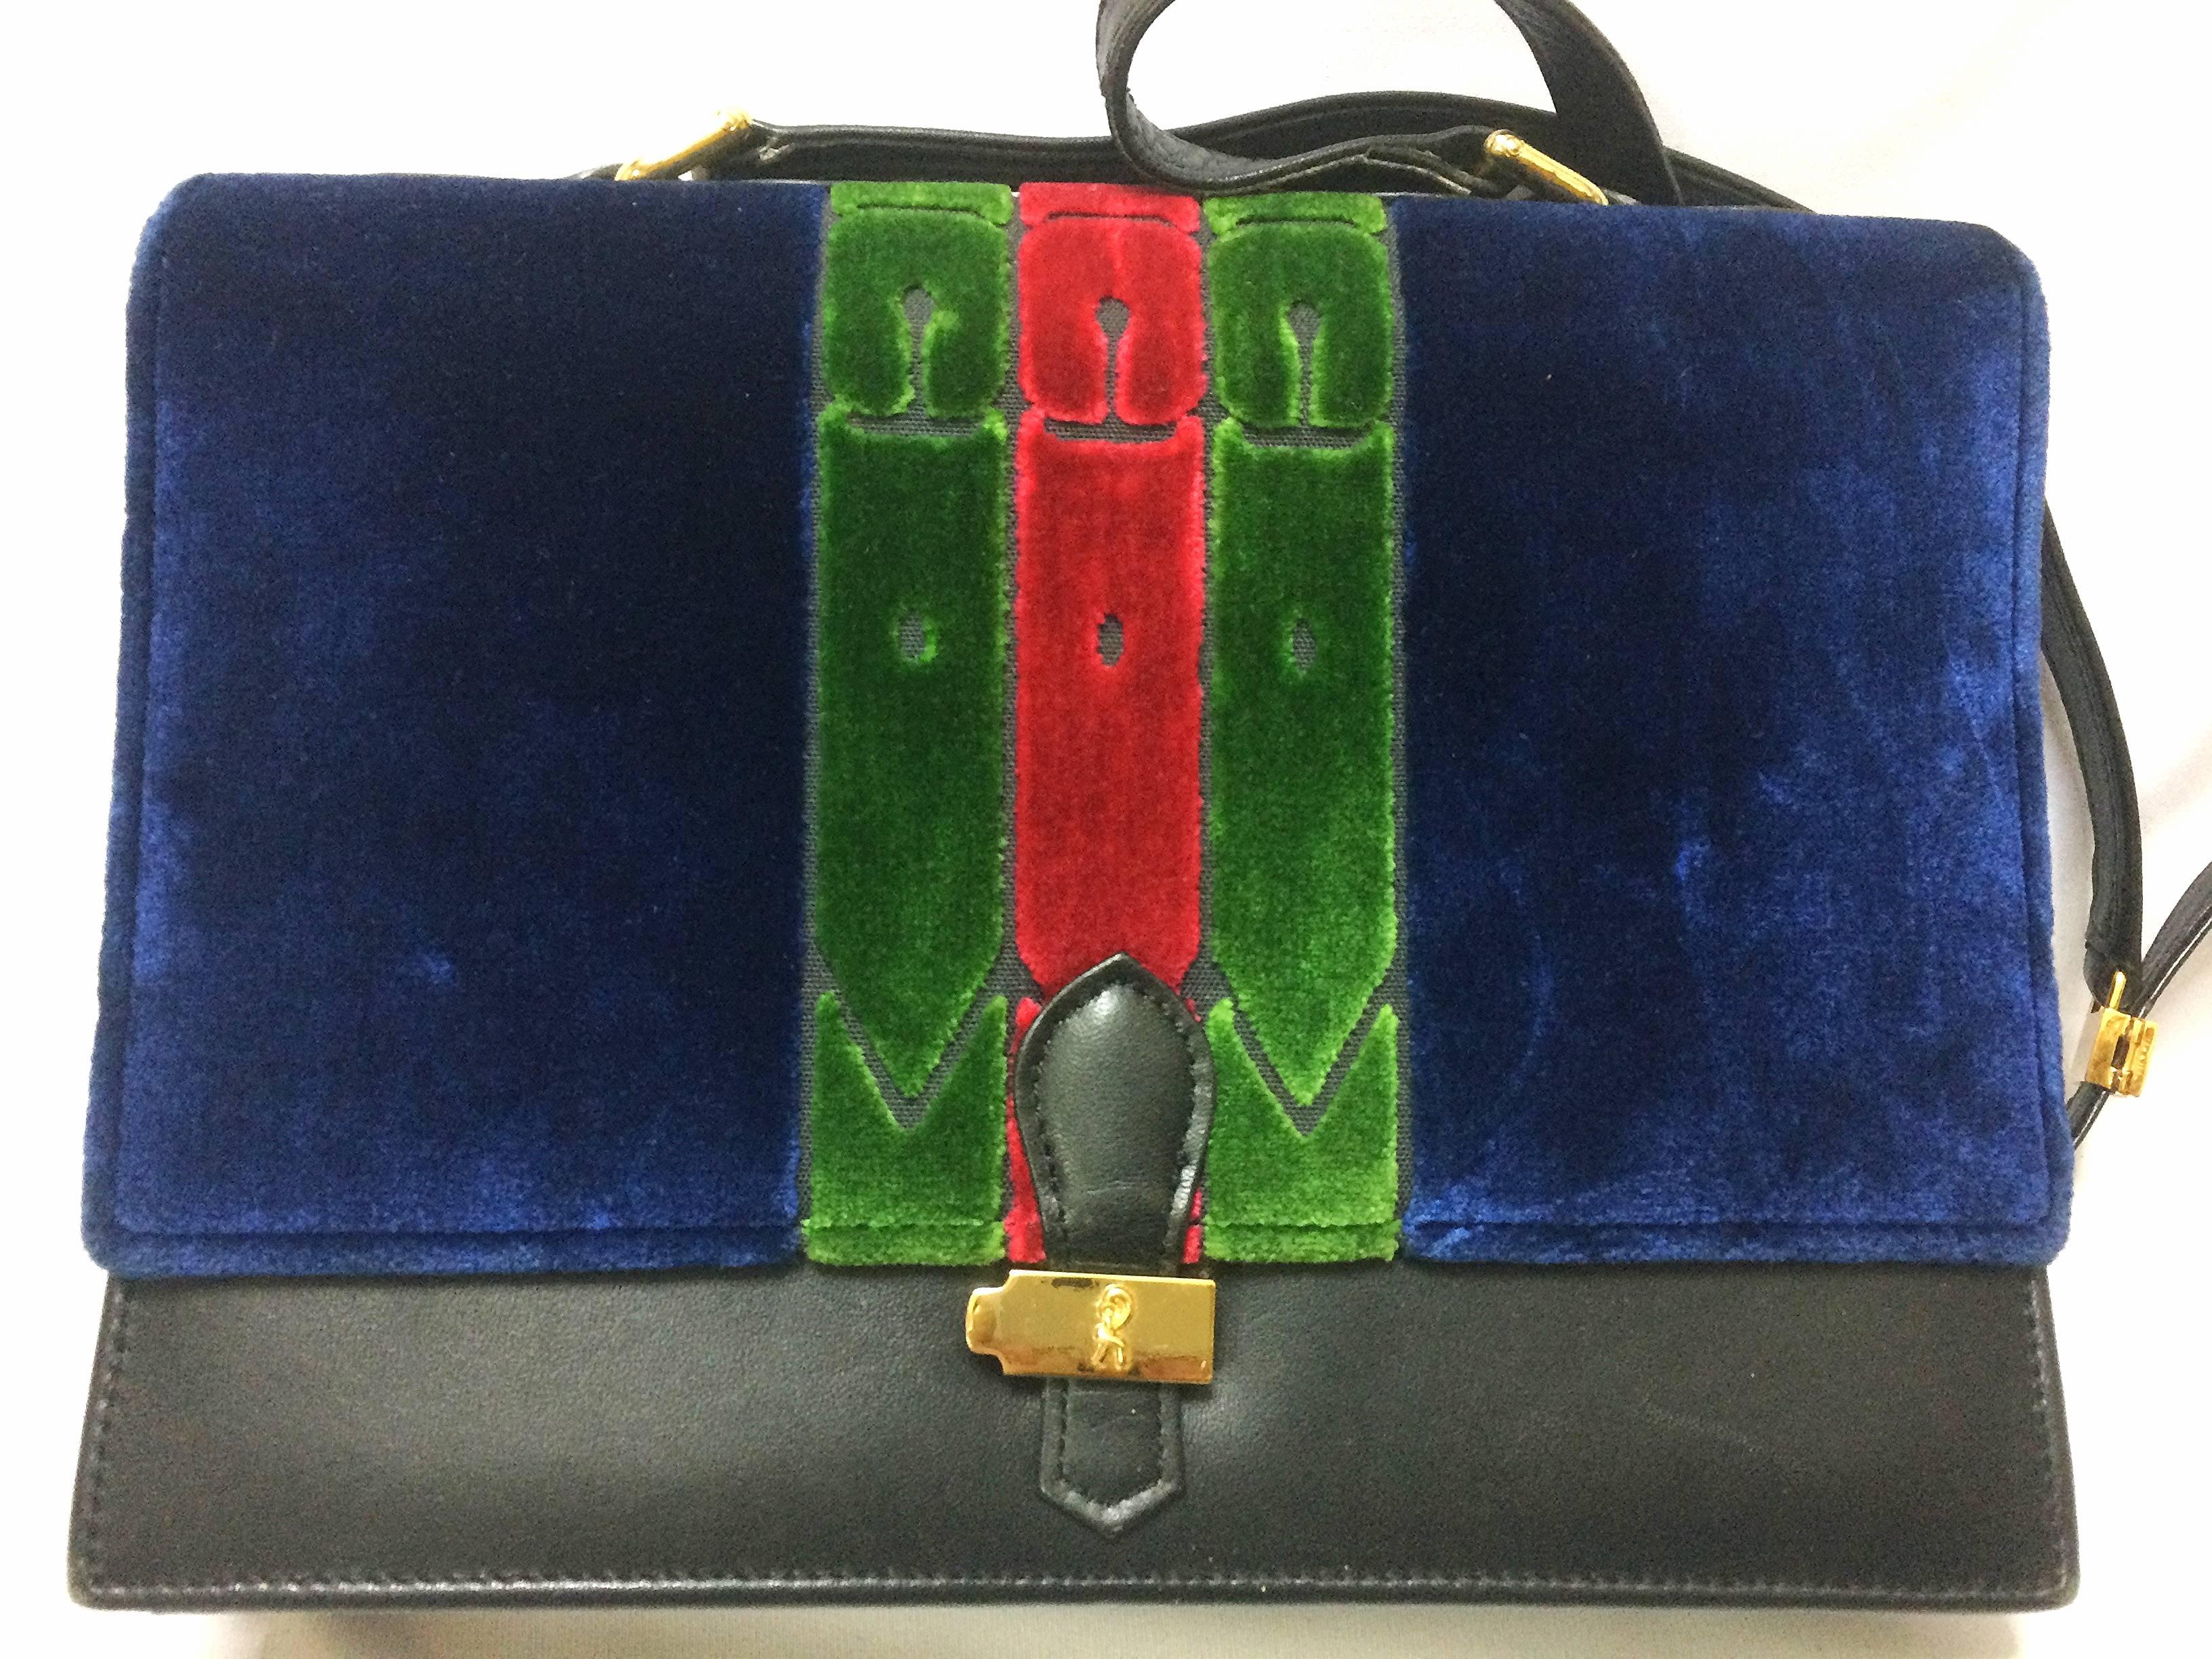 1980's Vintage Roberta di Camerino red, navy, and green ribbon velvet shoulder purse with golden R motif closure. Classic bag.

For all Roberta vintage lovers, this clutch is the one for you!

Very chic and cute! 
You will love its color iconic